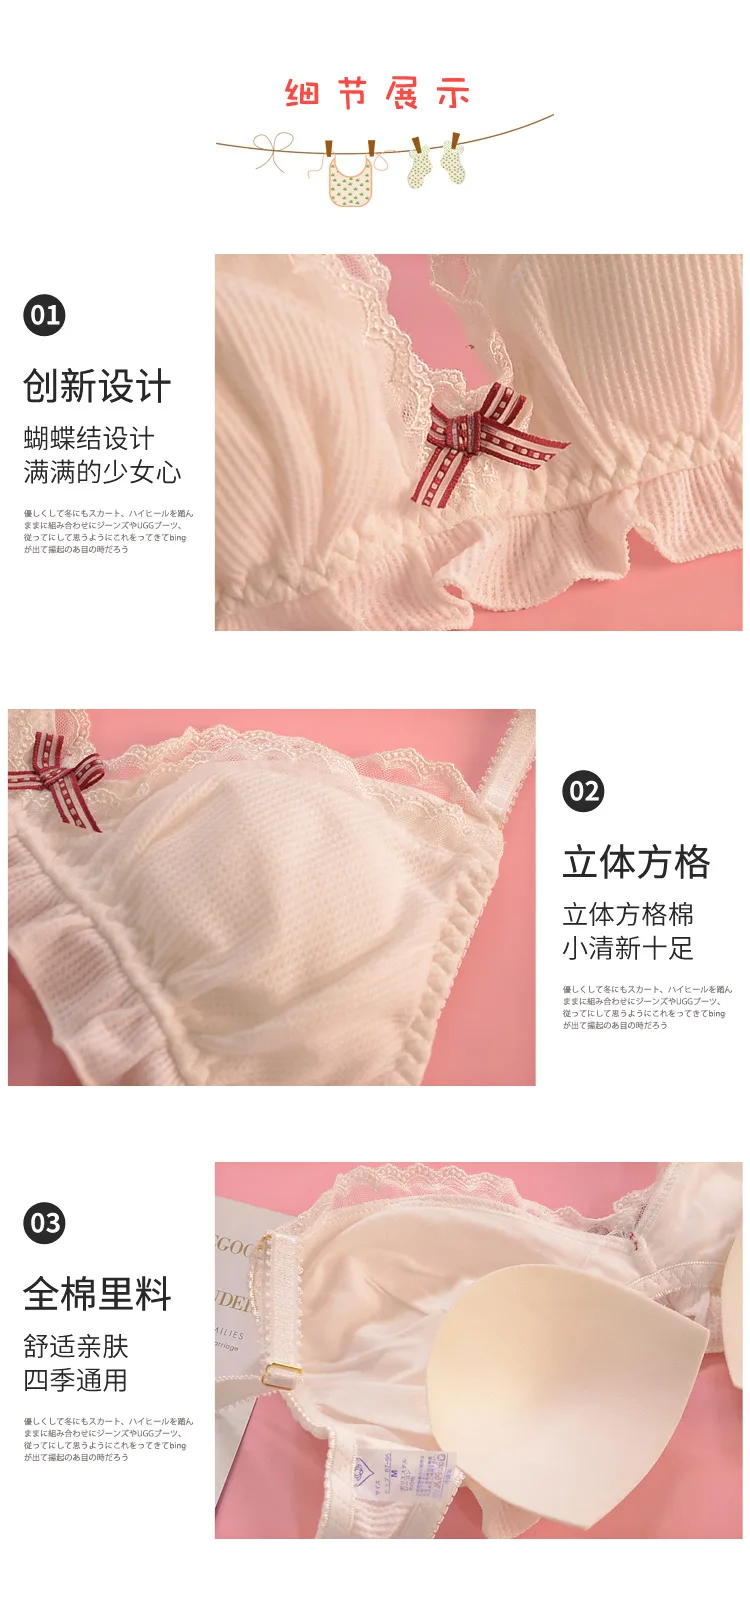 cheap underwear sets Japanese Student Girl's Underwear Set Cotton Bow Lace Wireless Bras Thongs Lace Lingerie Set Women Push Up Bra and Panty matching bra and panties